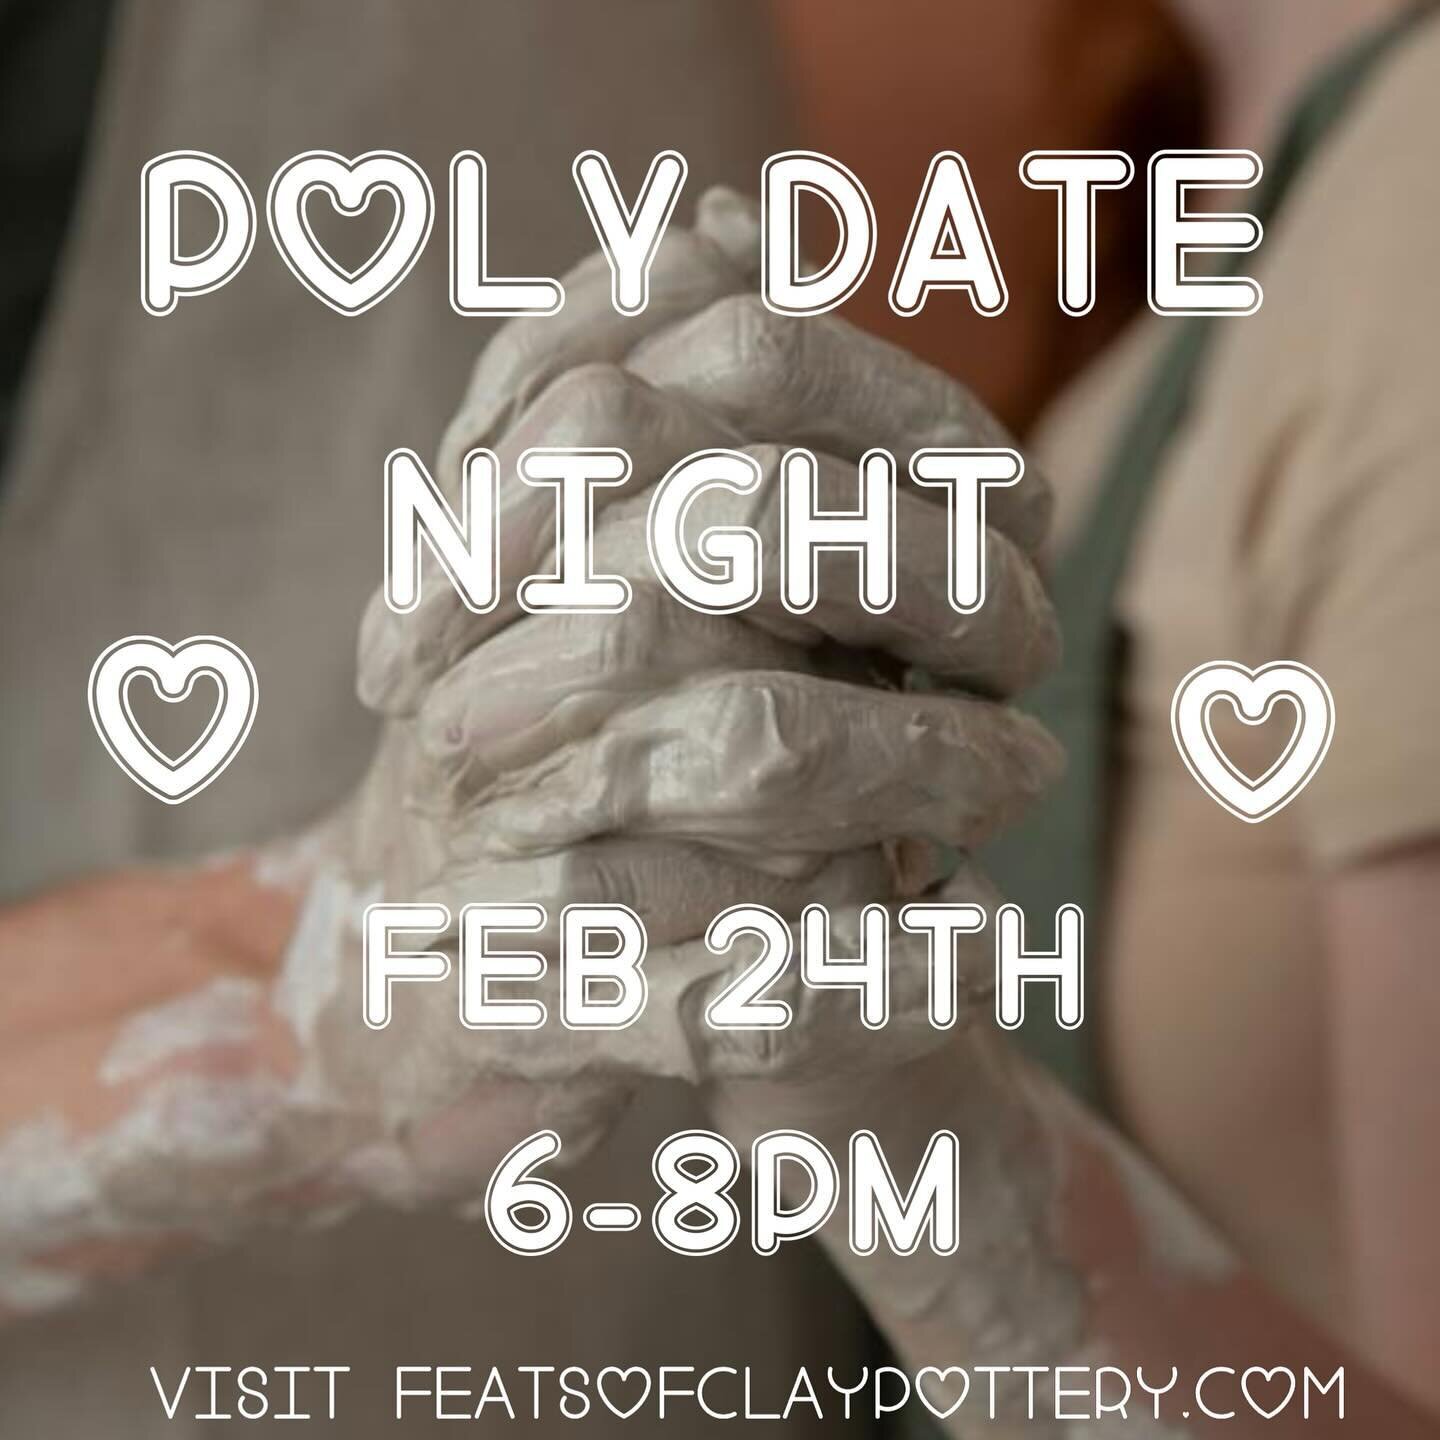 Poly date night coming up! Bring yourself or the crew! This class is created for our poly cuties to mingle and get creative. Feb 24th 6-8pm, link in bio ✨